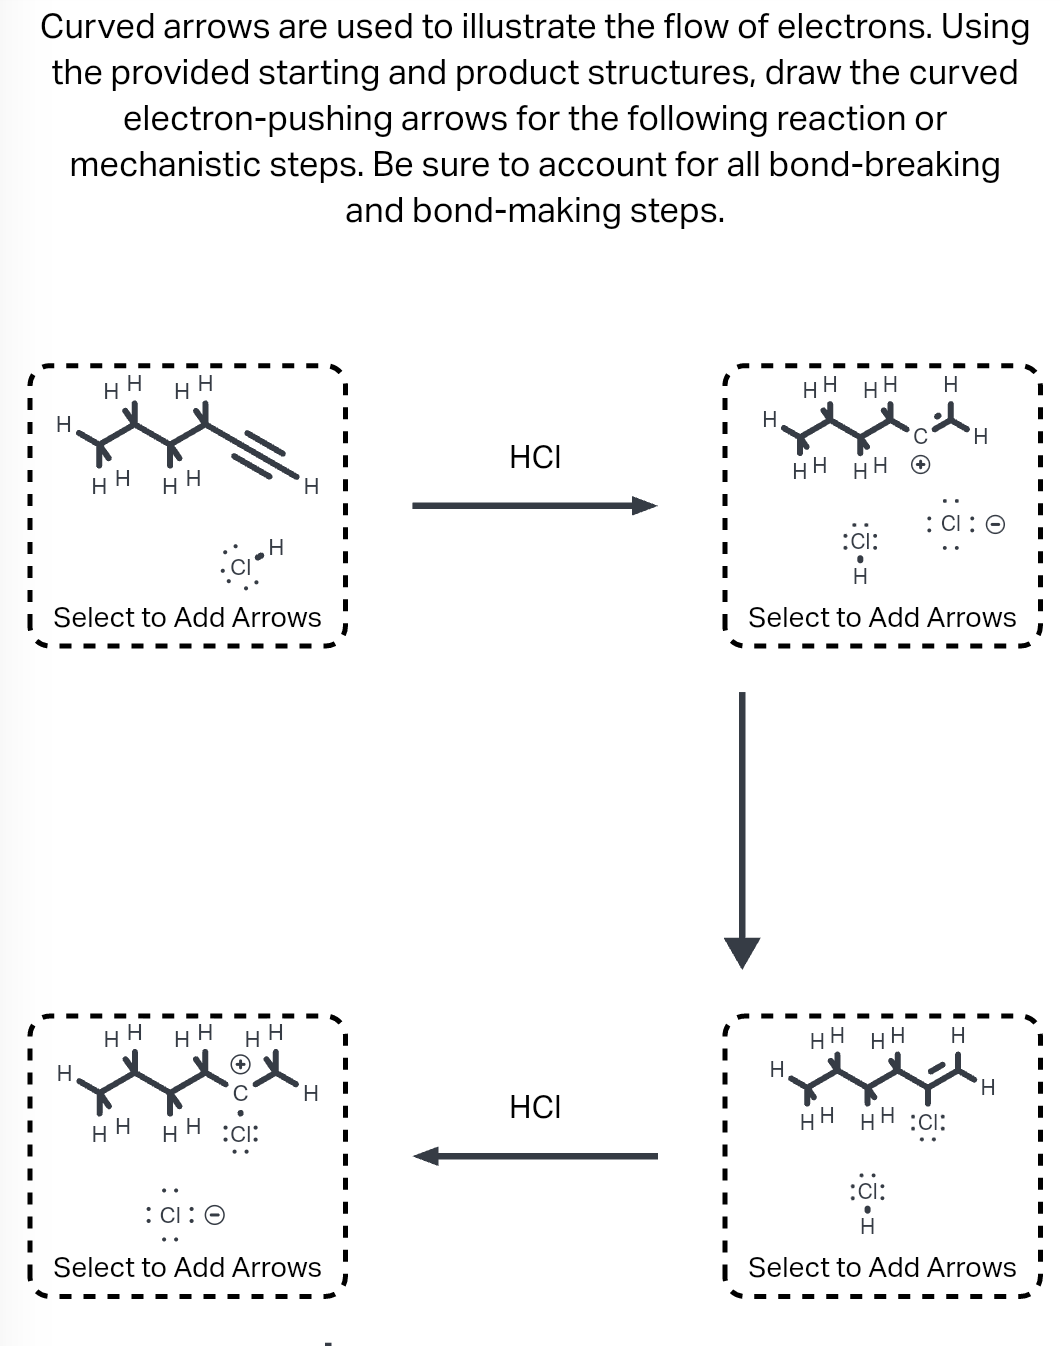 Curved arrows are used to illustrate the flow of electrons. Using
the provided starting and product structures, draw the curved
arrows for the following reaction or
electron-pushing
steps. Be sure to account for all bond-breaking
and bond-making steps.
mechanistic
H
H H HH
H
HH
HH
Select to Add Arrows
HH
HH HH HH
H
H
H
: CI:
:CI:
H
H
Select to Add Arrows
HCI
HCI
HH HH H
H
HH
HH
CH H
:CI:
H
Select to Add Arrows
HH HH H
НН НН :CI:
:ci:
'Н
Select to Add Arrows